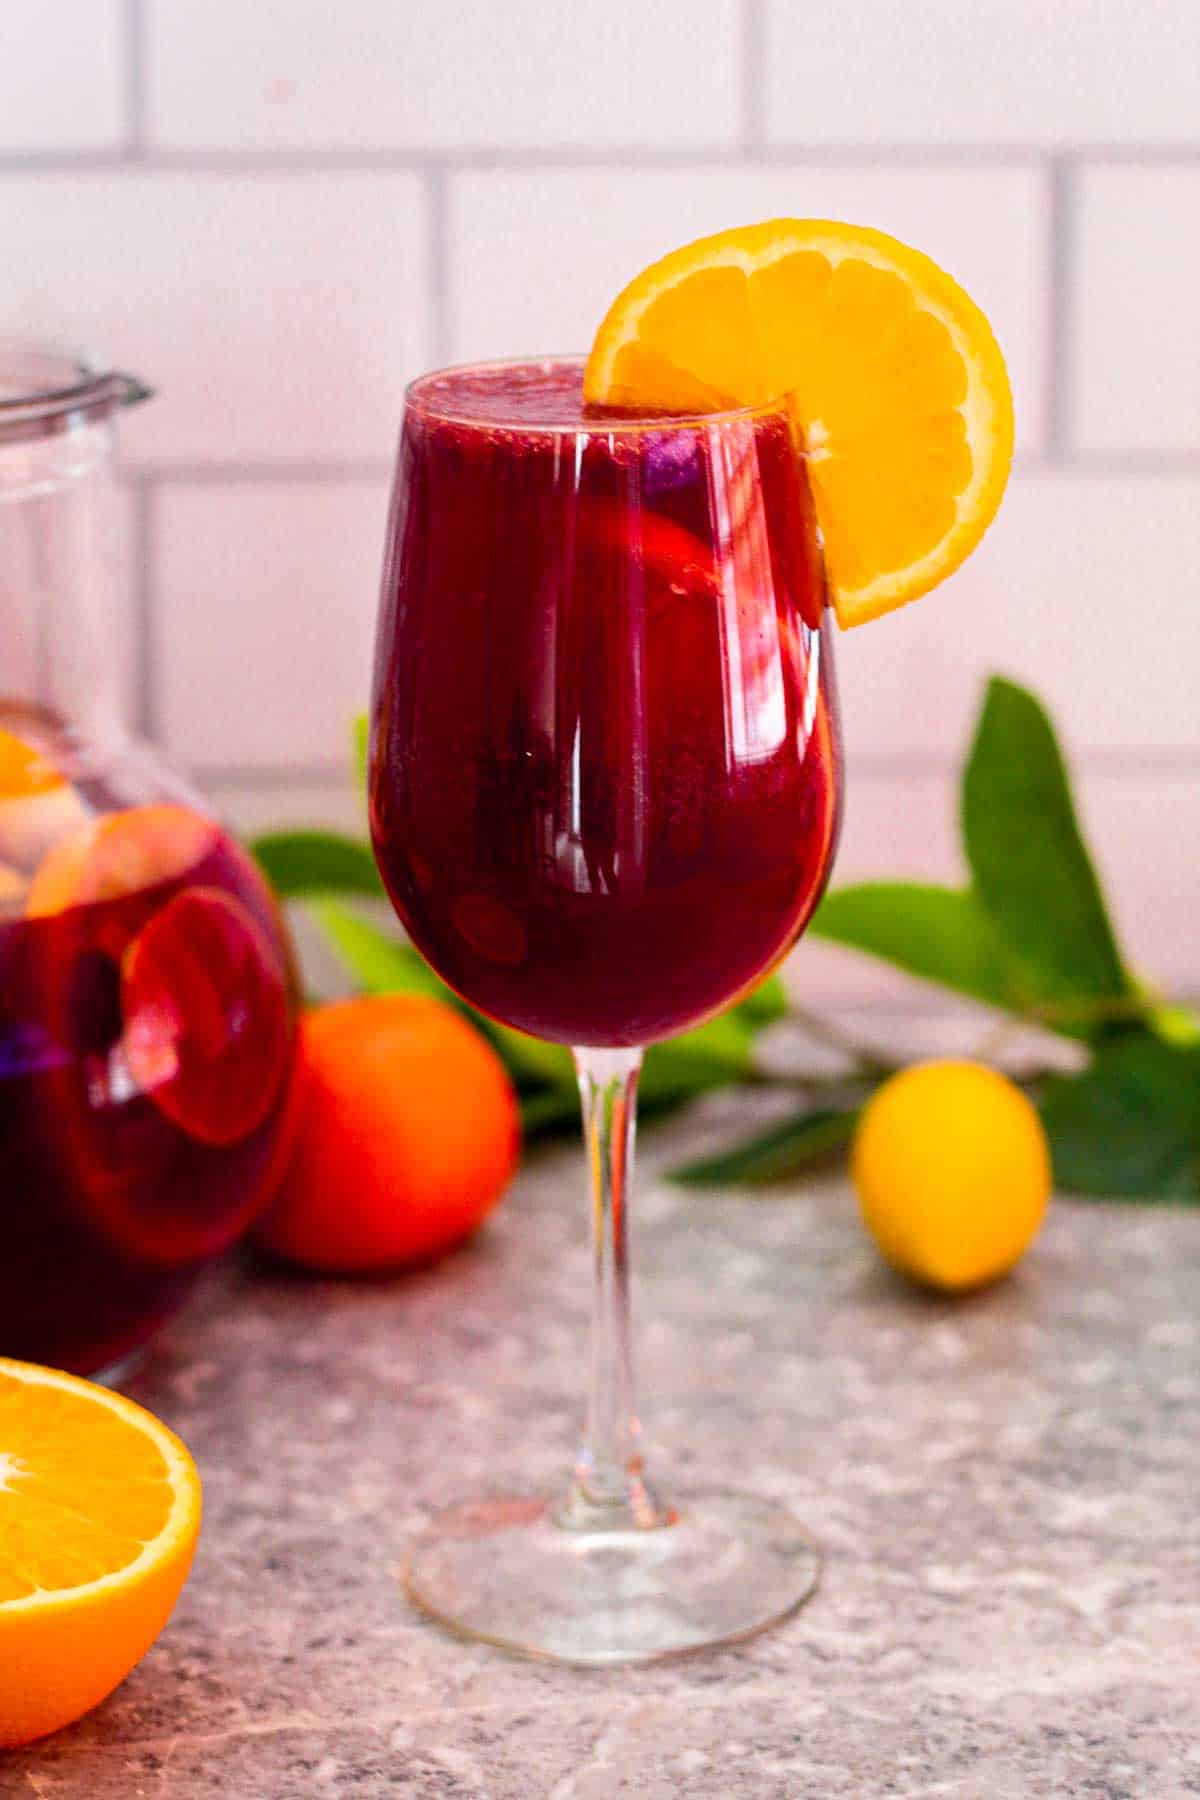 A wine glass with citrus sangria shown next to a sangria pitcher. The wine glass is garnished with an orange slice and there are more citrus fruits surrounding the glass.